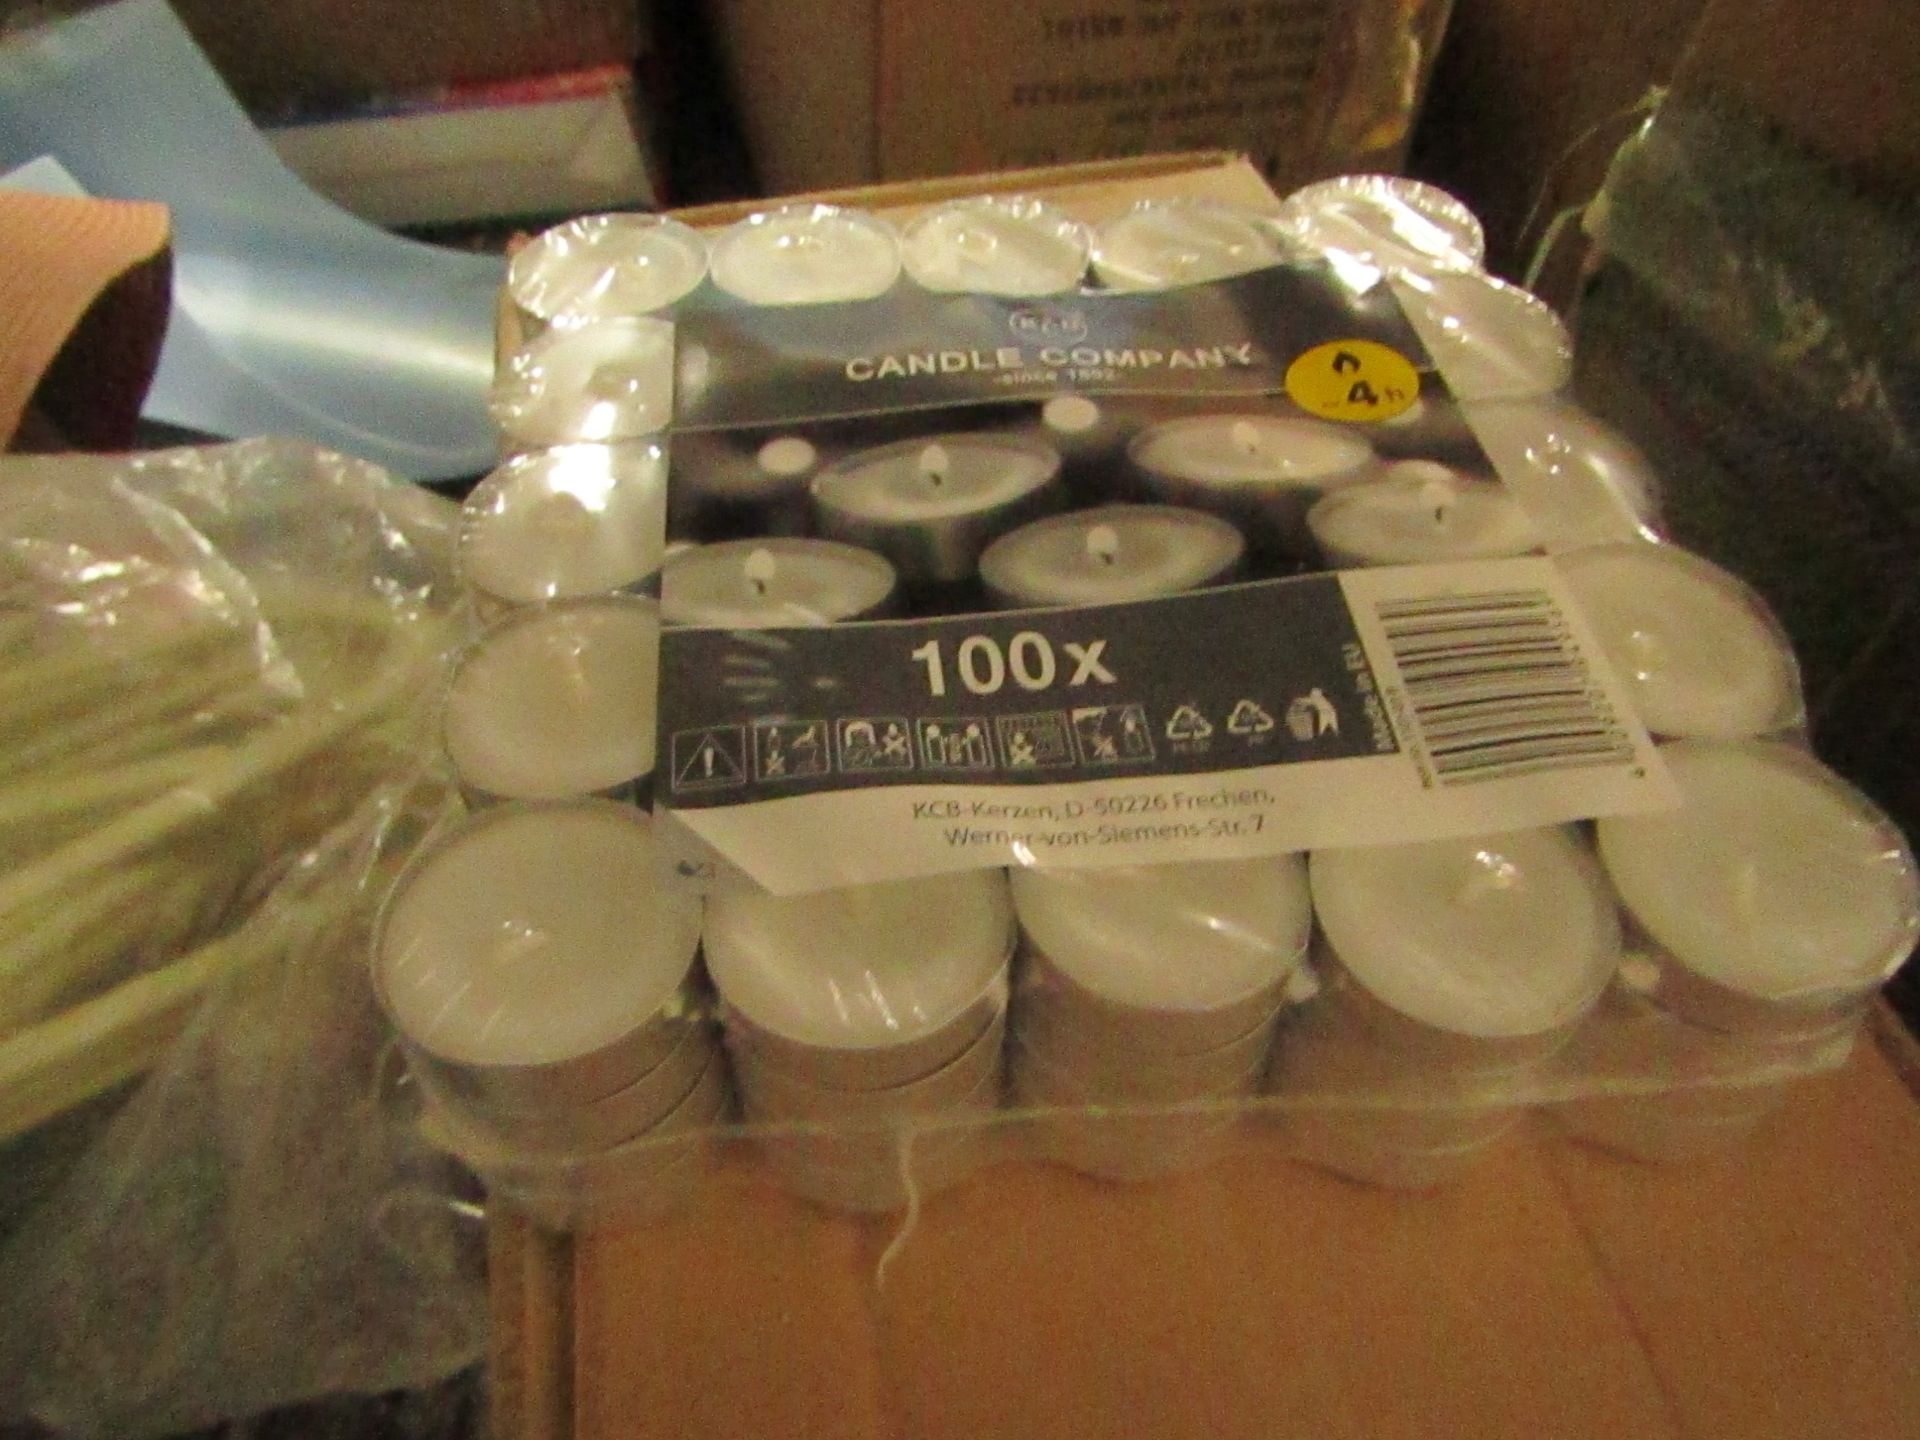 1x Candle Company - Tea Light Candles (100 Per Pack) - All Unused & Packaged.